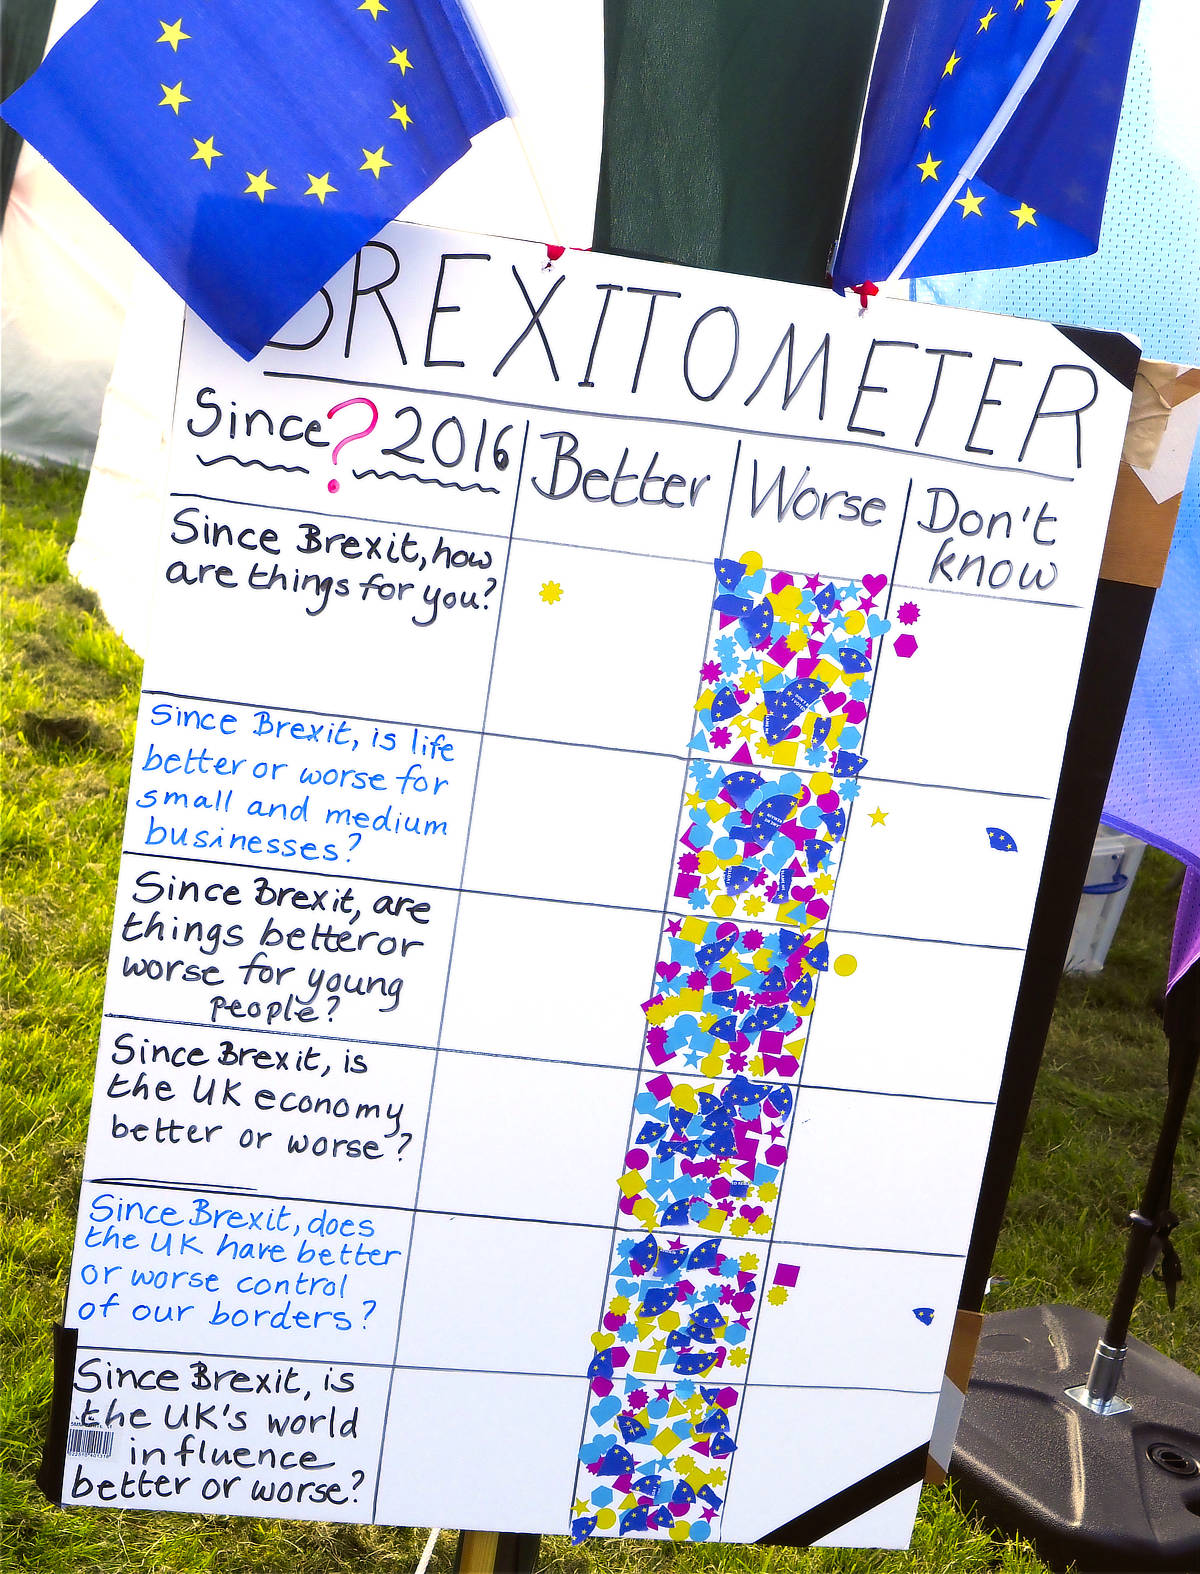 during the york pride event - Brexitometer